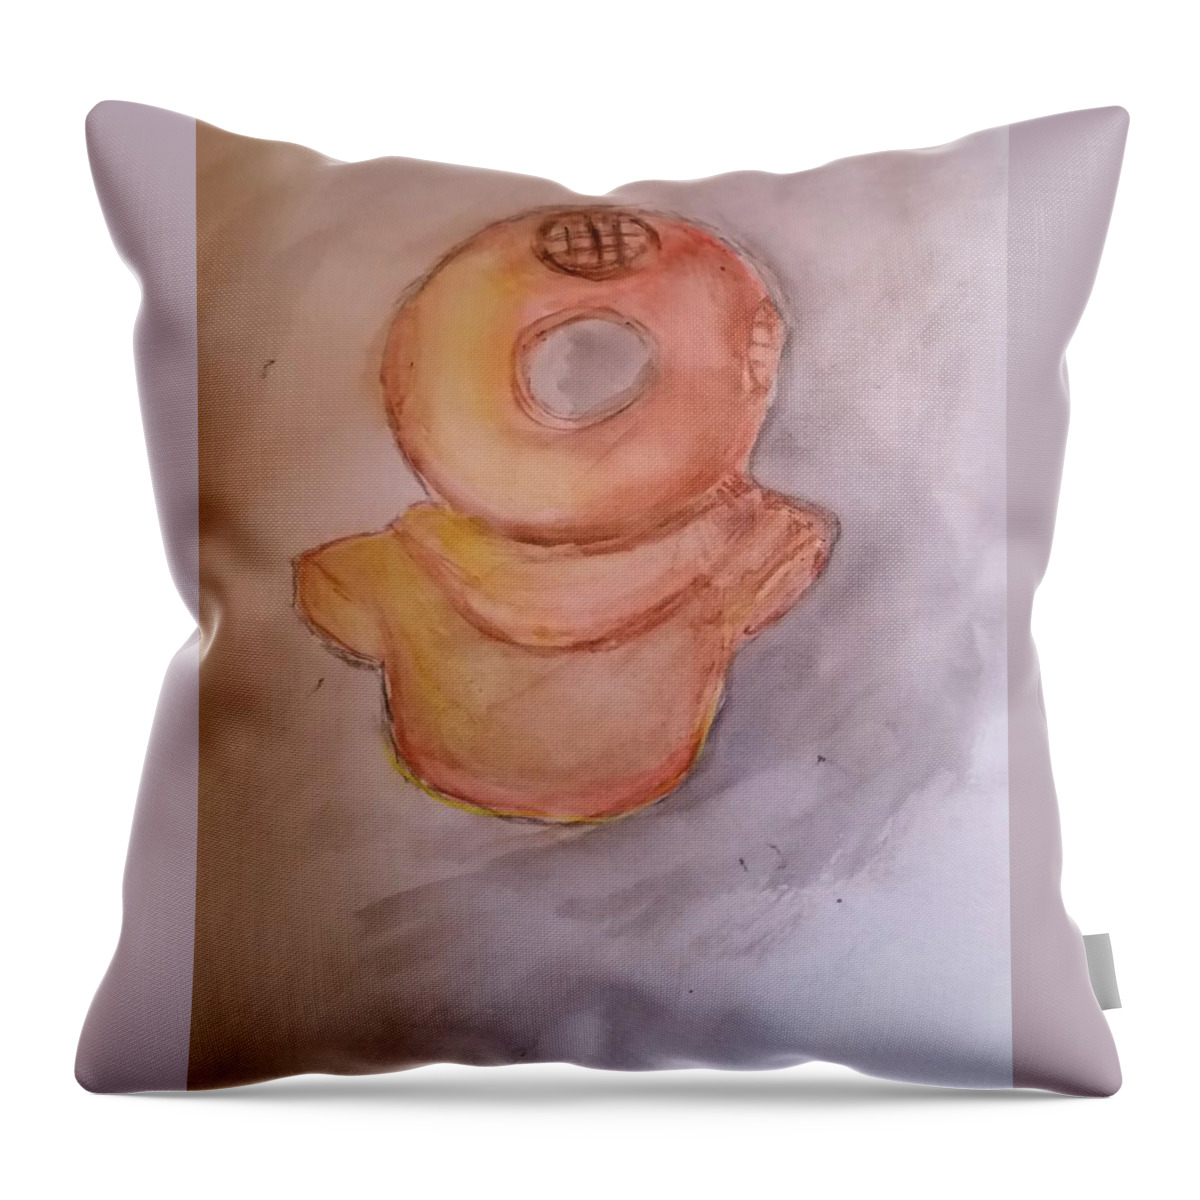 Watercolor Throw Pillow featuring the painting The Divers Helmet by Stacie Siemsen